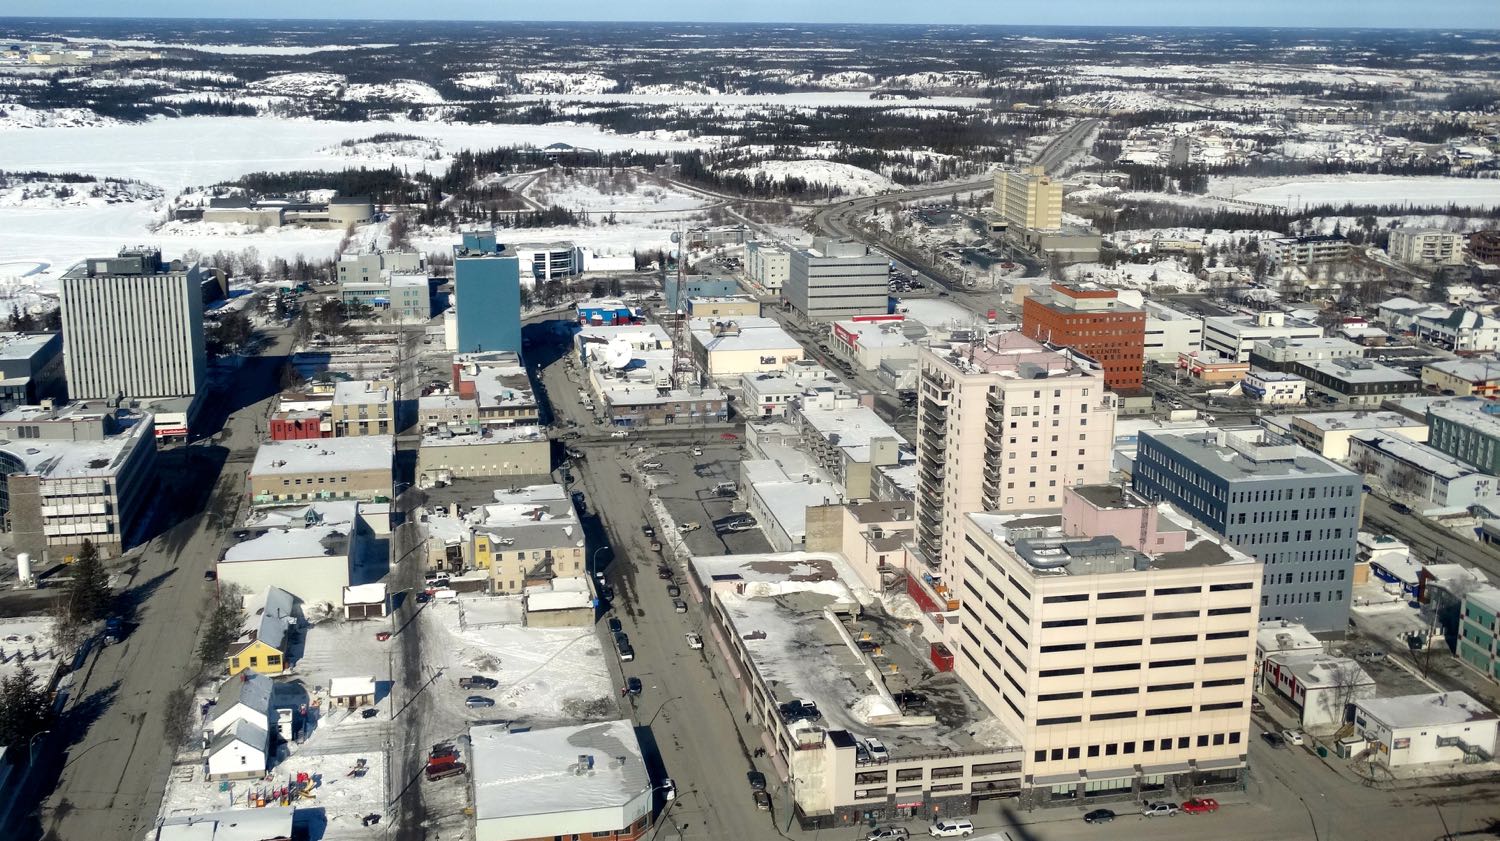 Yellowknife named capital of the NWT 50 years ago today - My Yellowknife No...